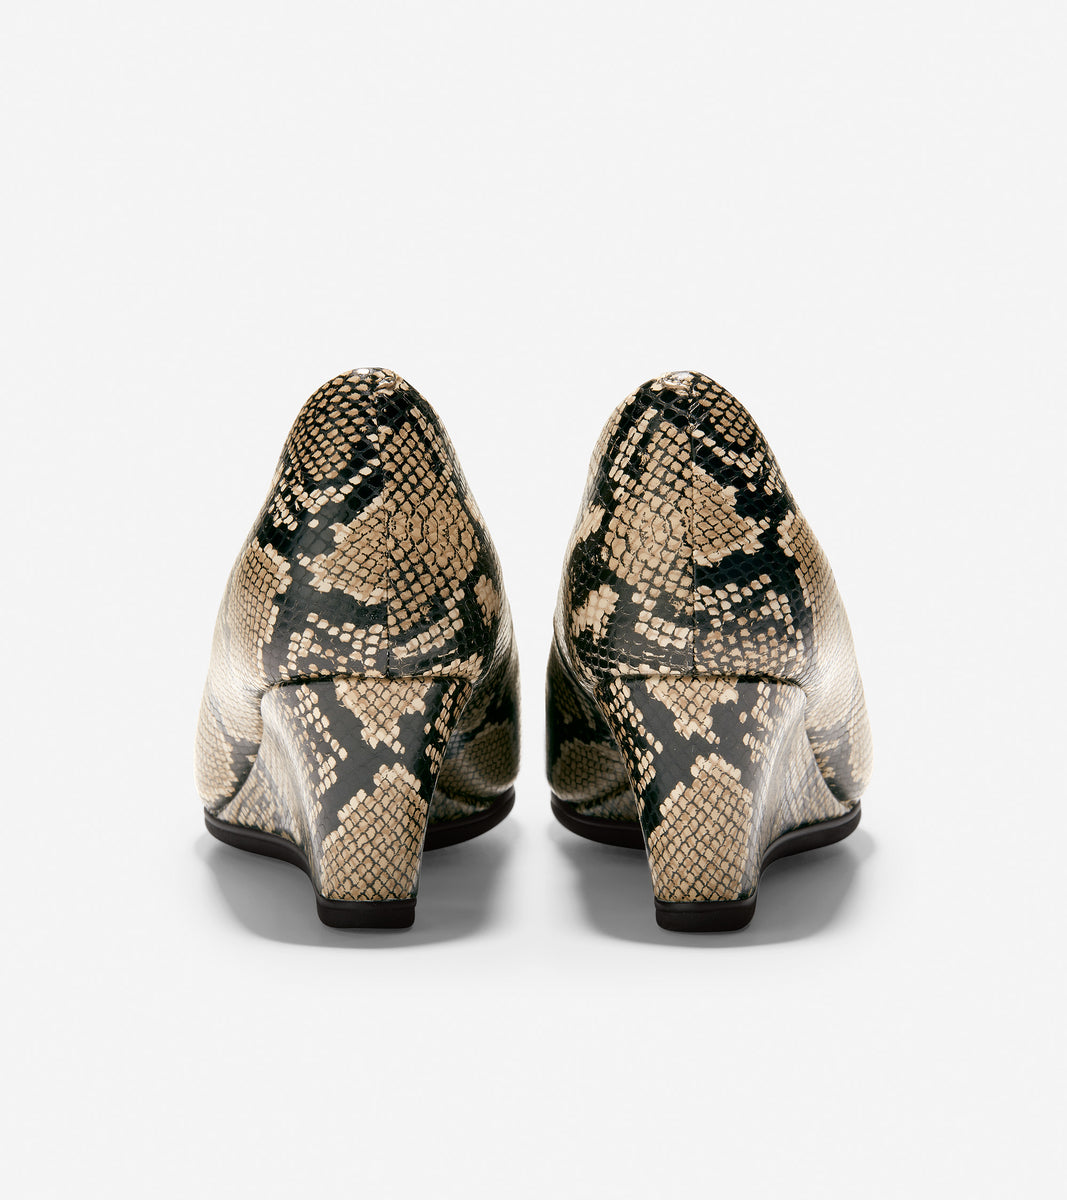 ColeHaan-Grand Ambition Open Toe Wedge-w19413-Amphora Snake Print Leather